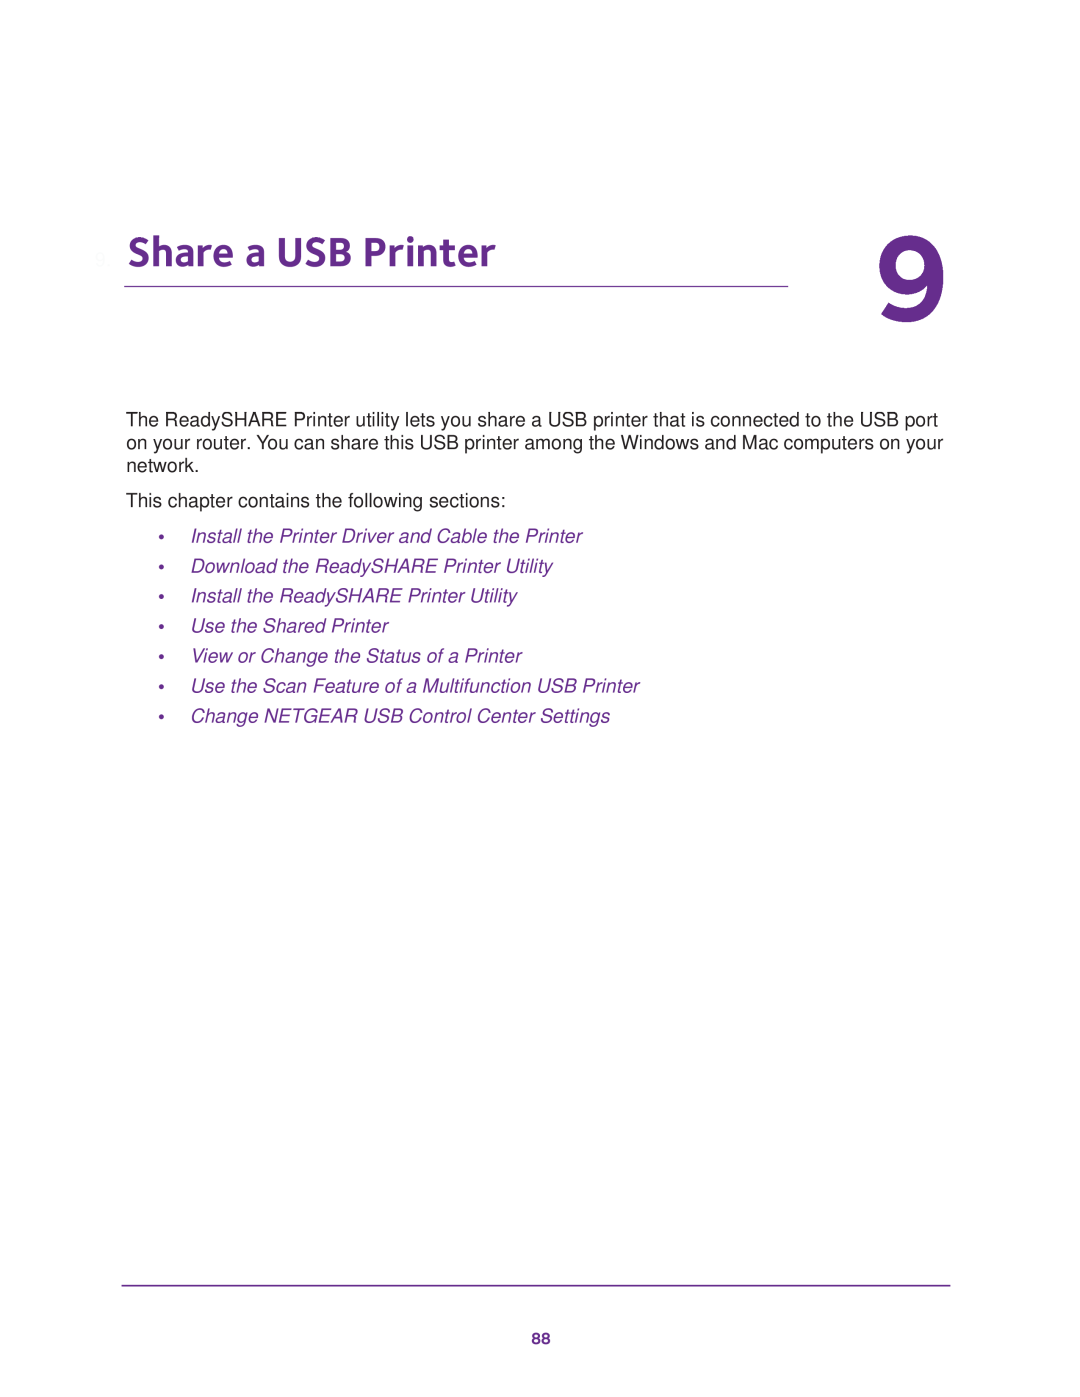 NETGEAR Model R7000 user manual Share a USB Printer, Install the Printer Driver and Cable the Printer 